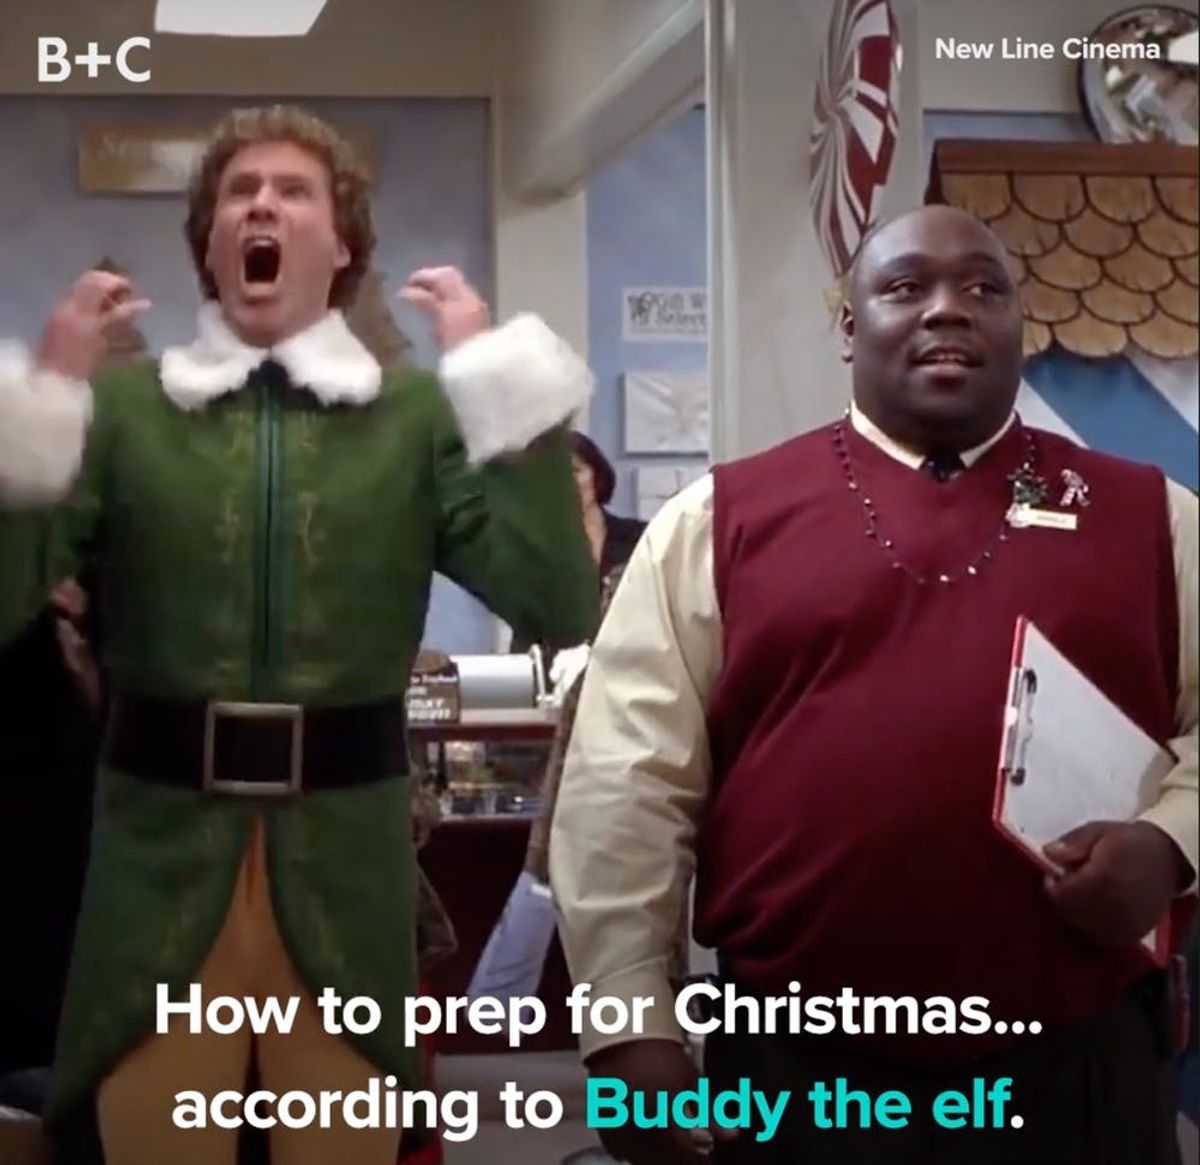 How to Prep for Christmas According to Buddy the Elf